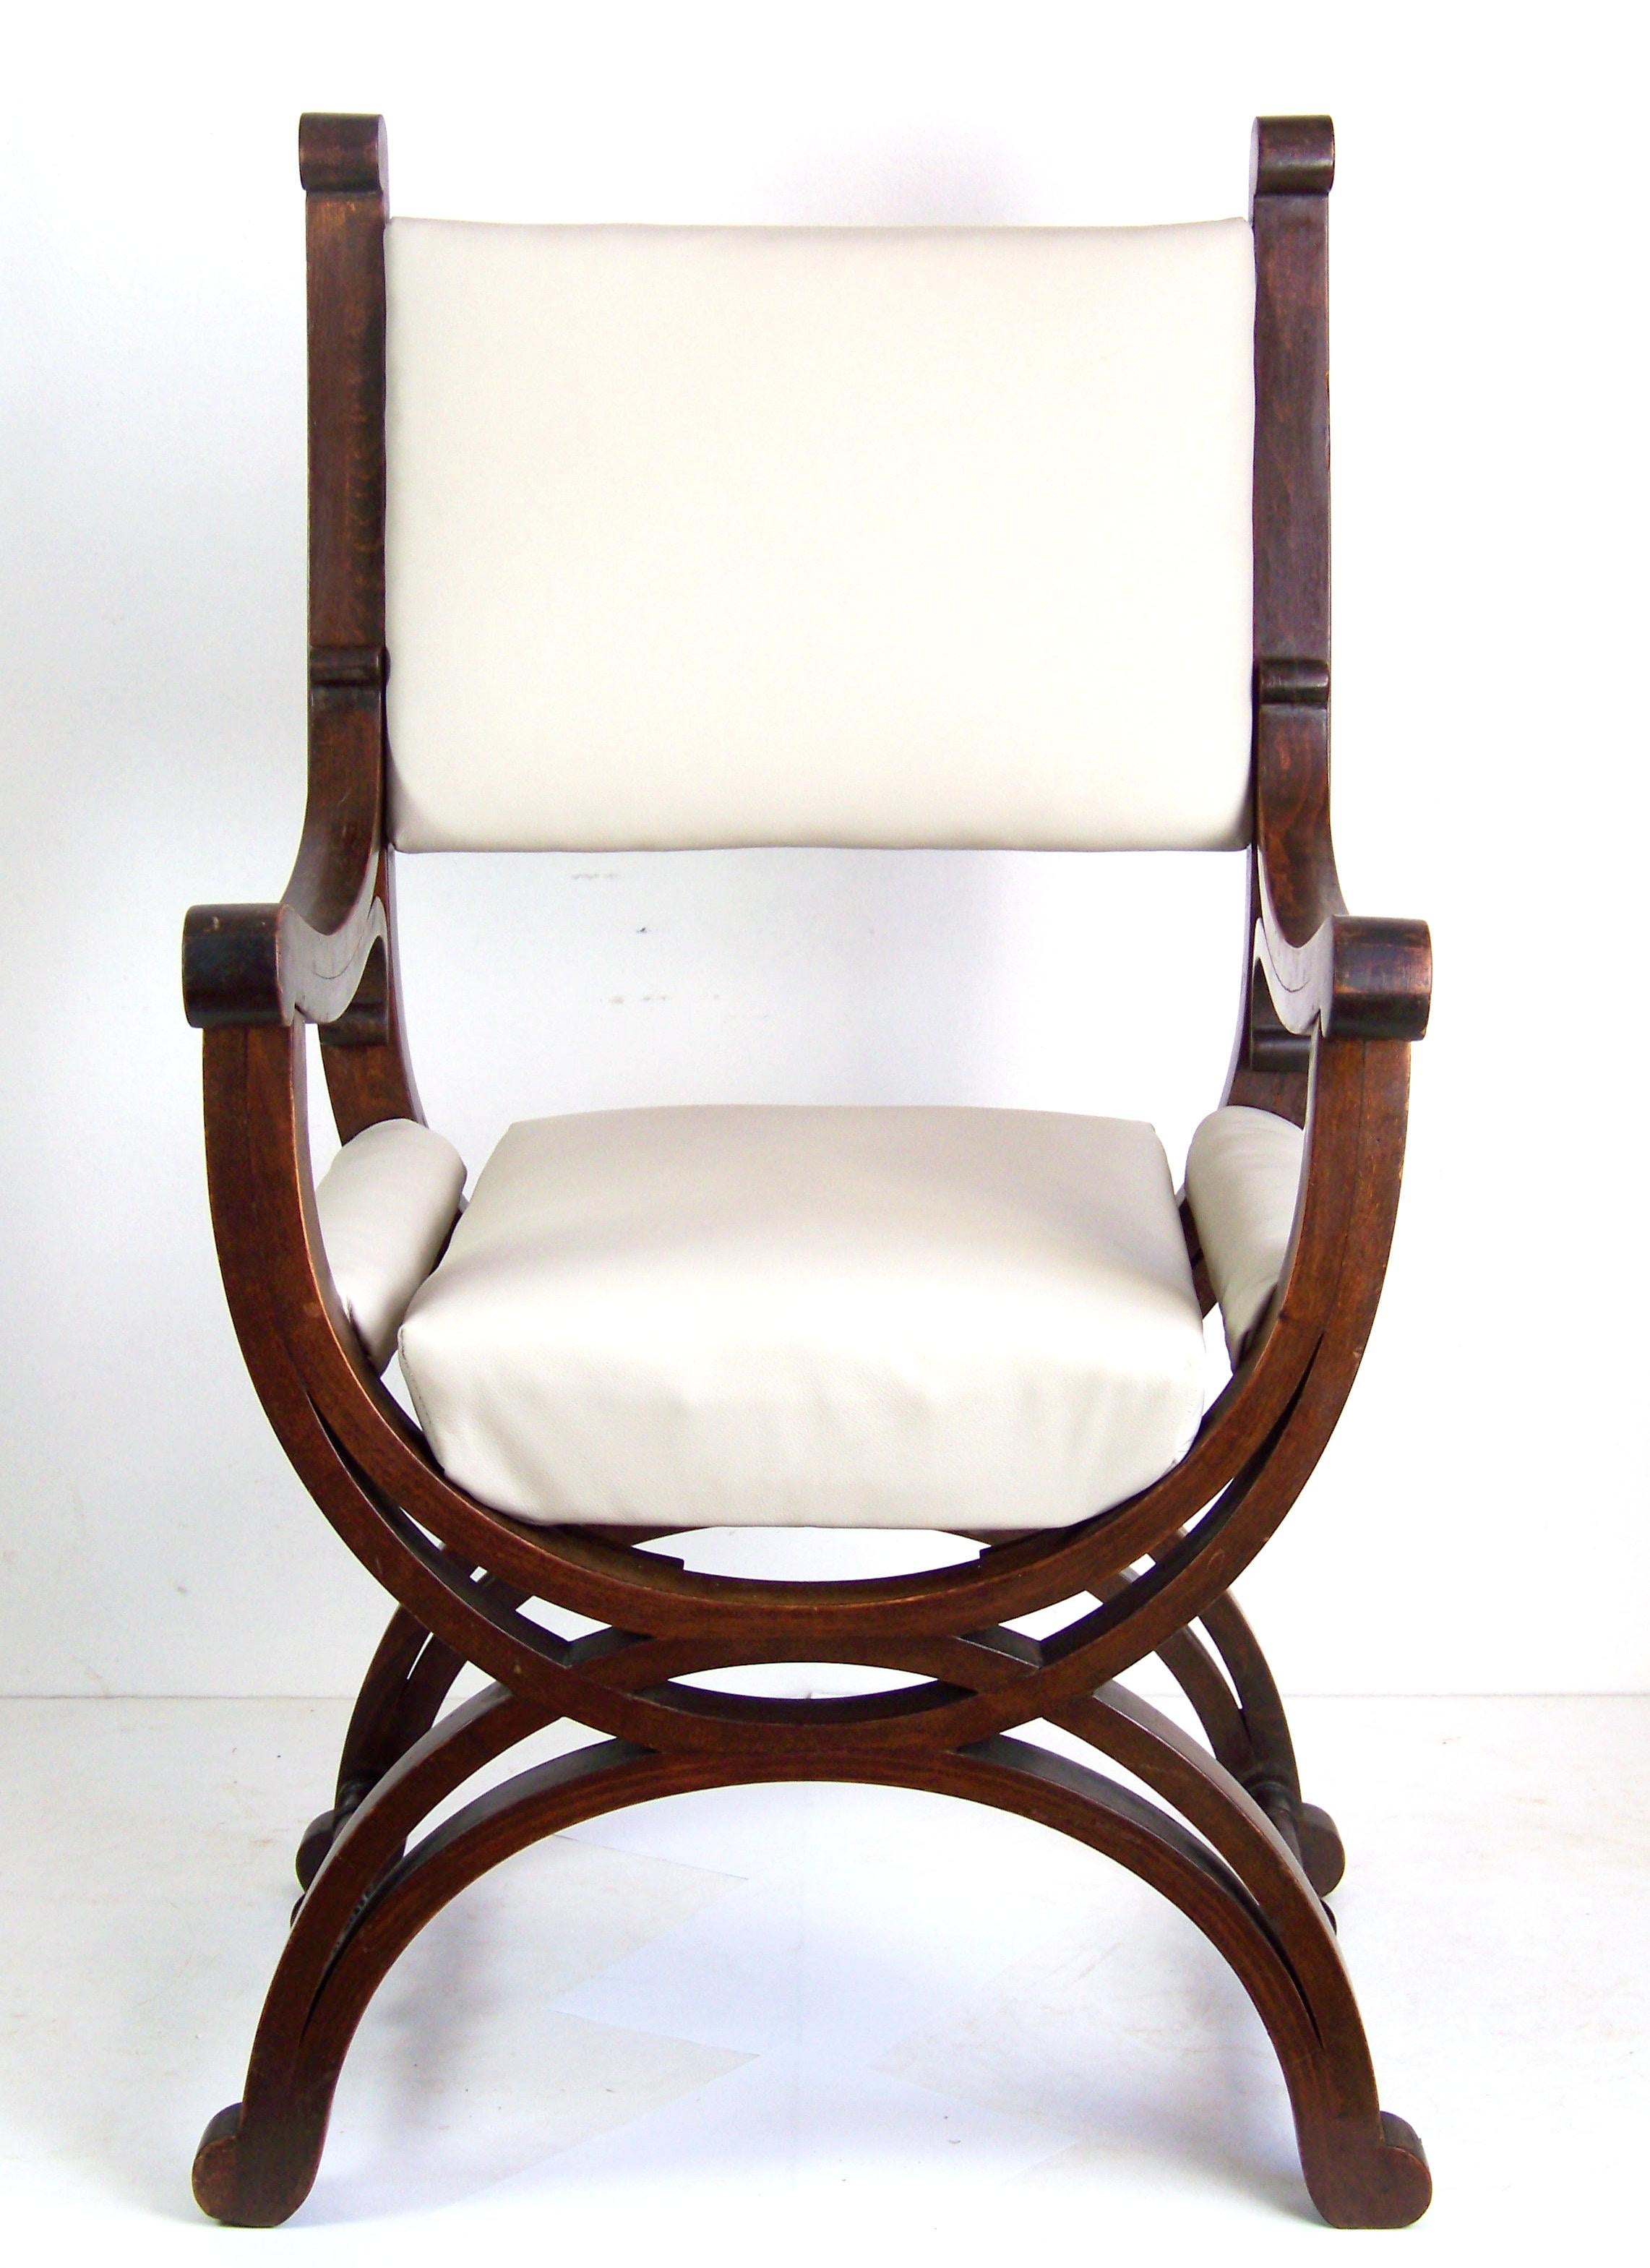 New leather upholstery, wooden structure in very good original condition.